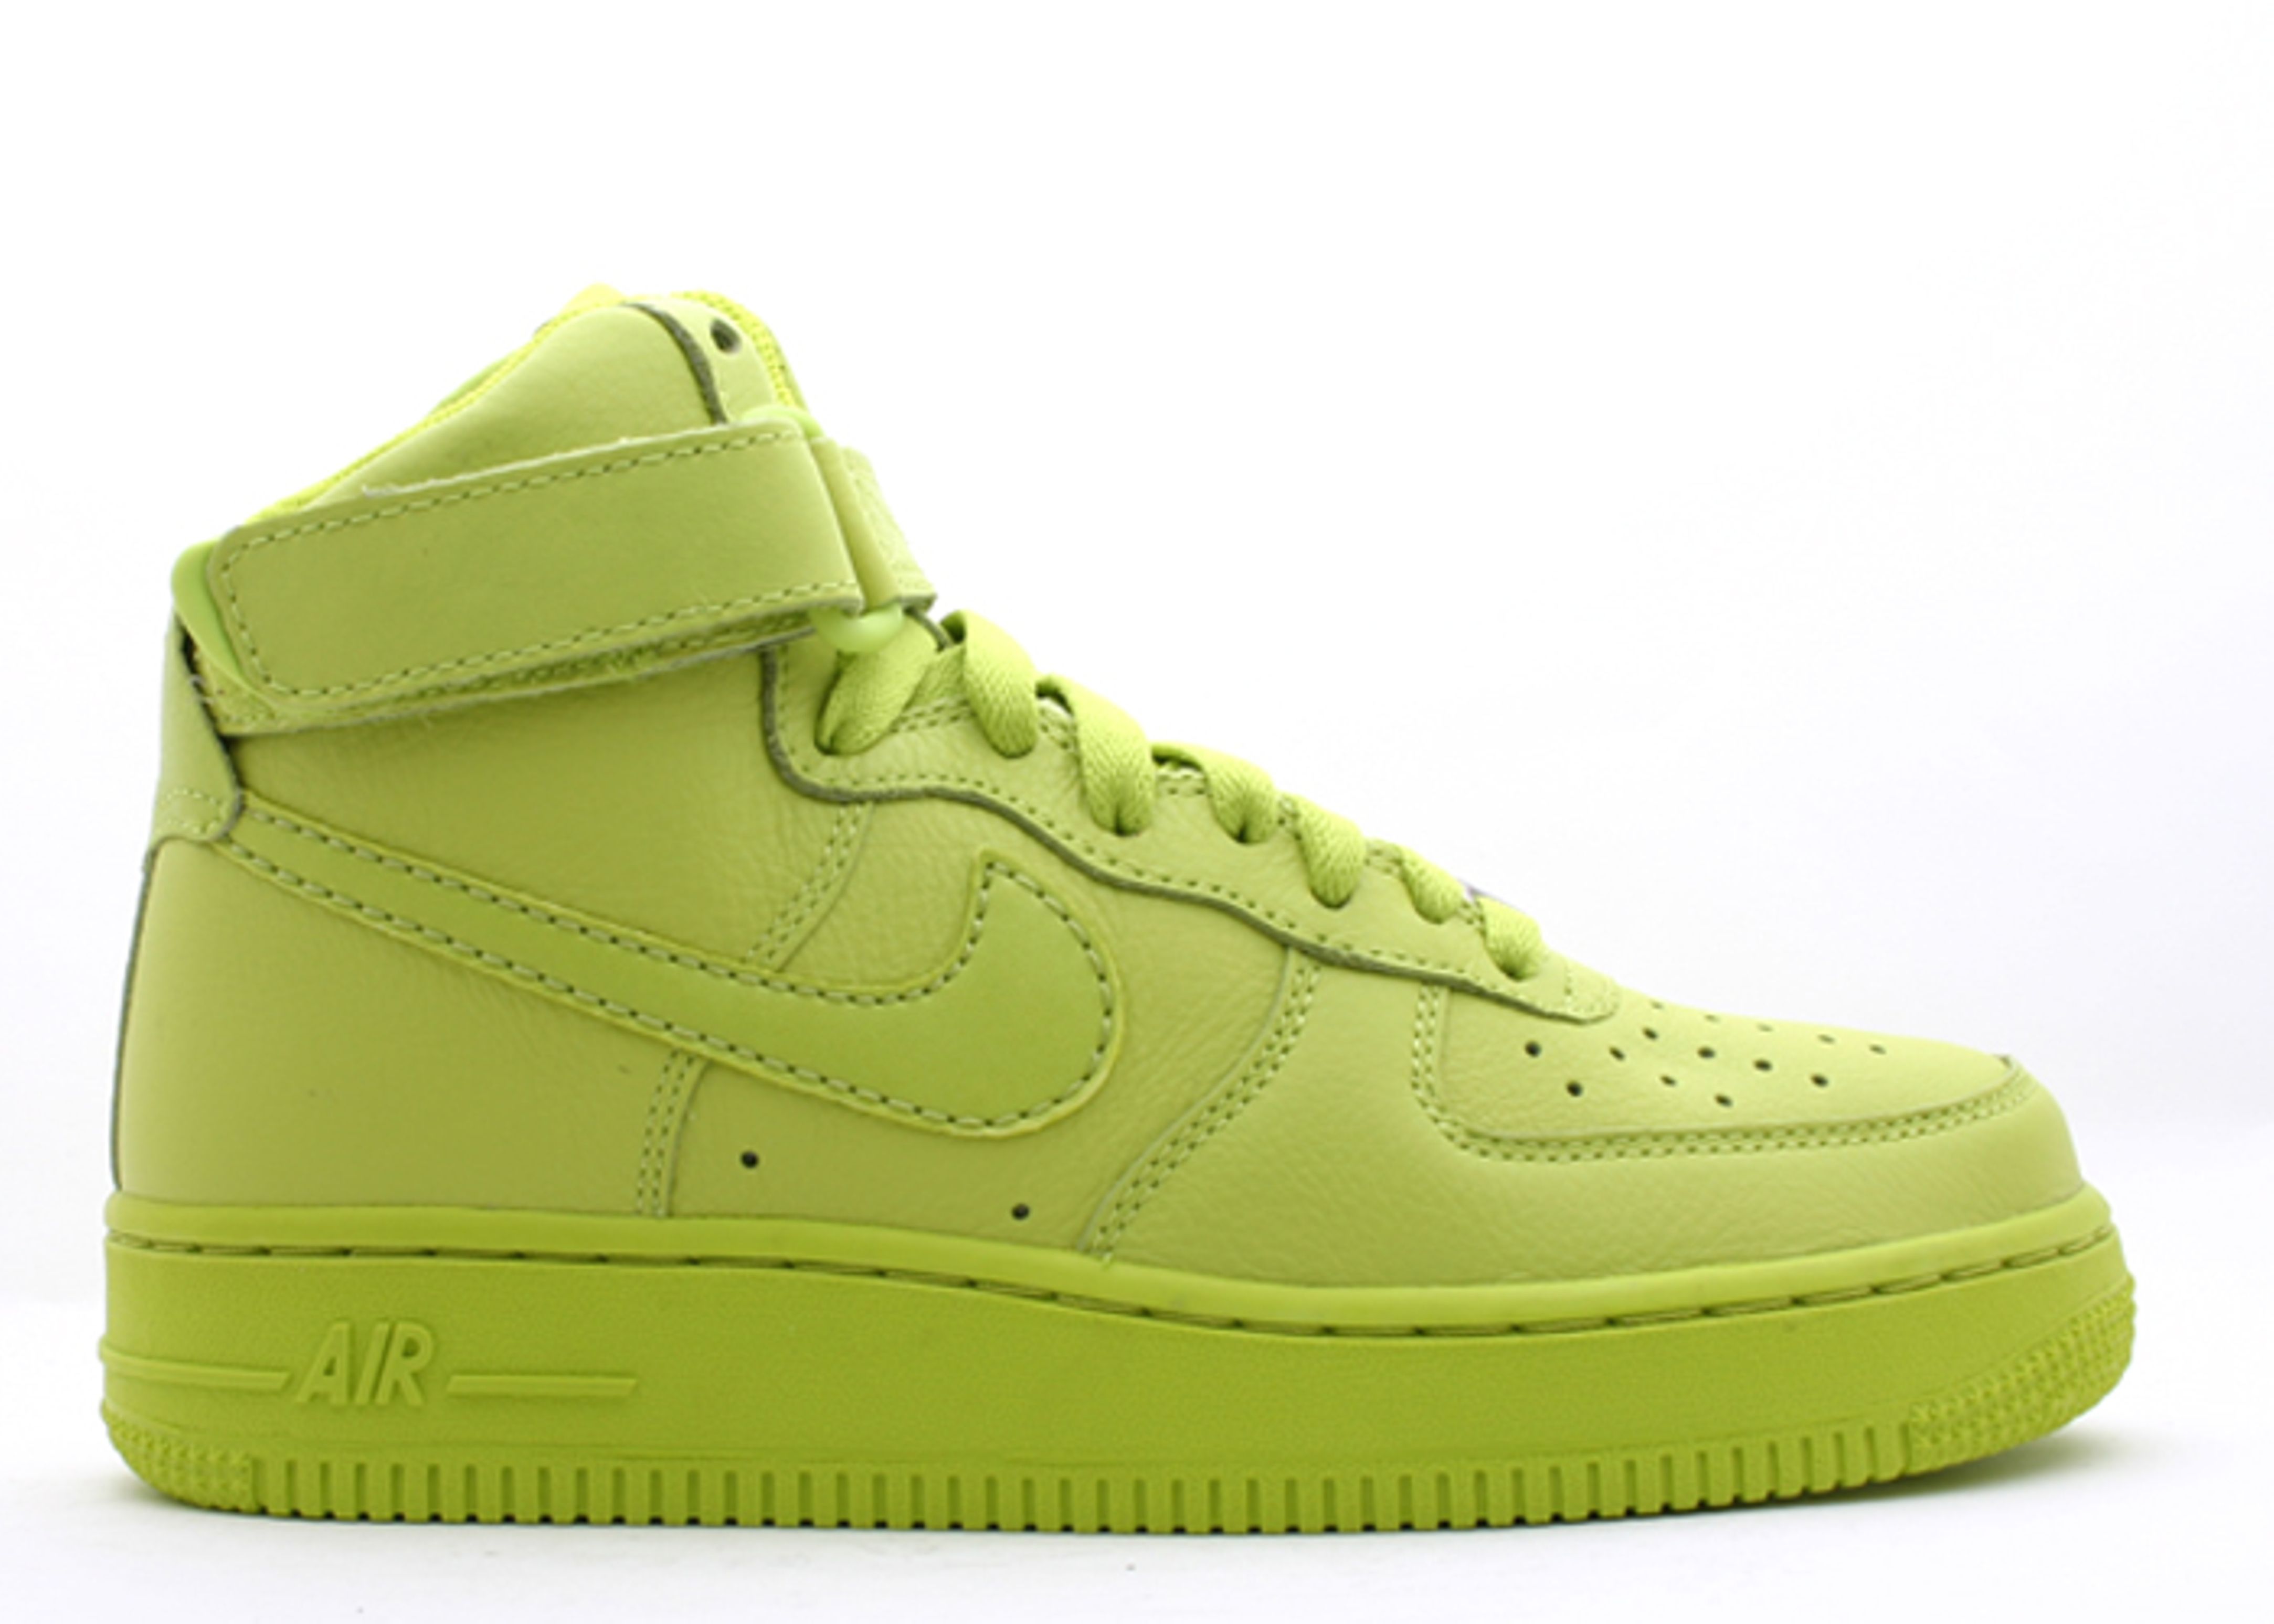 Nike Air Force 1 High WMNS - Bright Cactus - Now Available